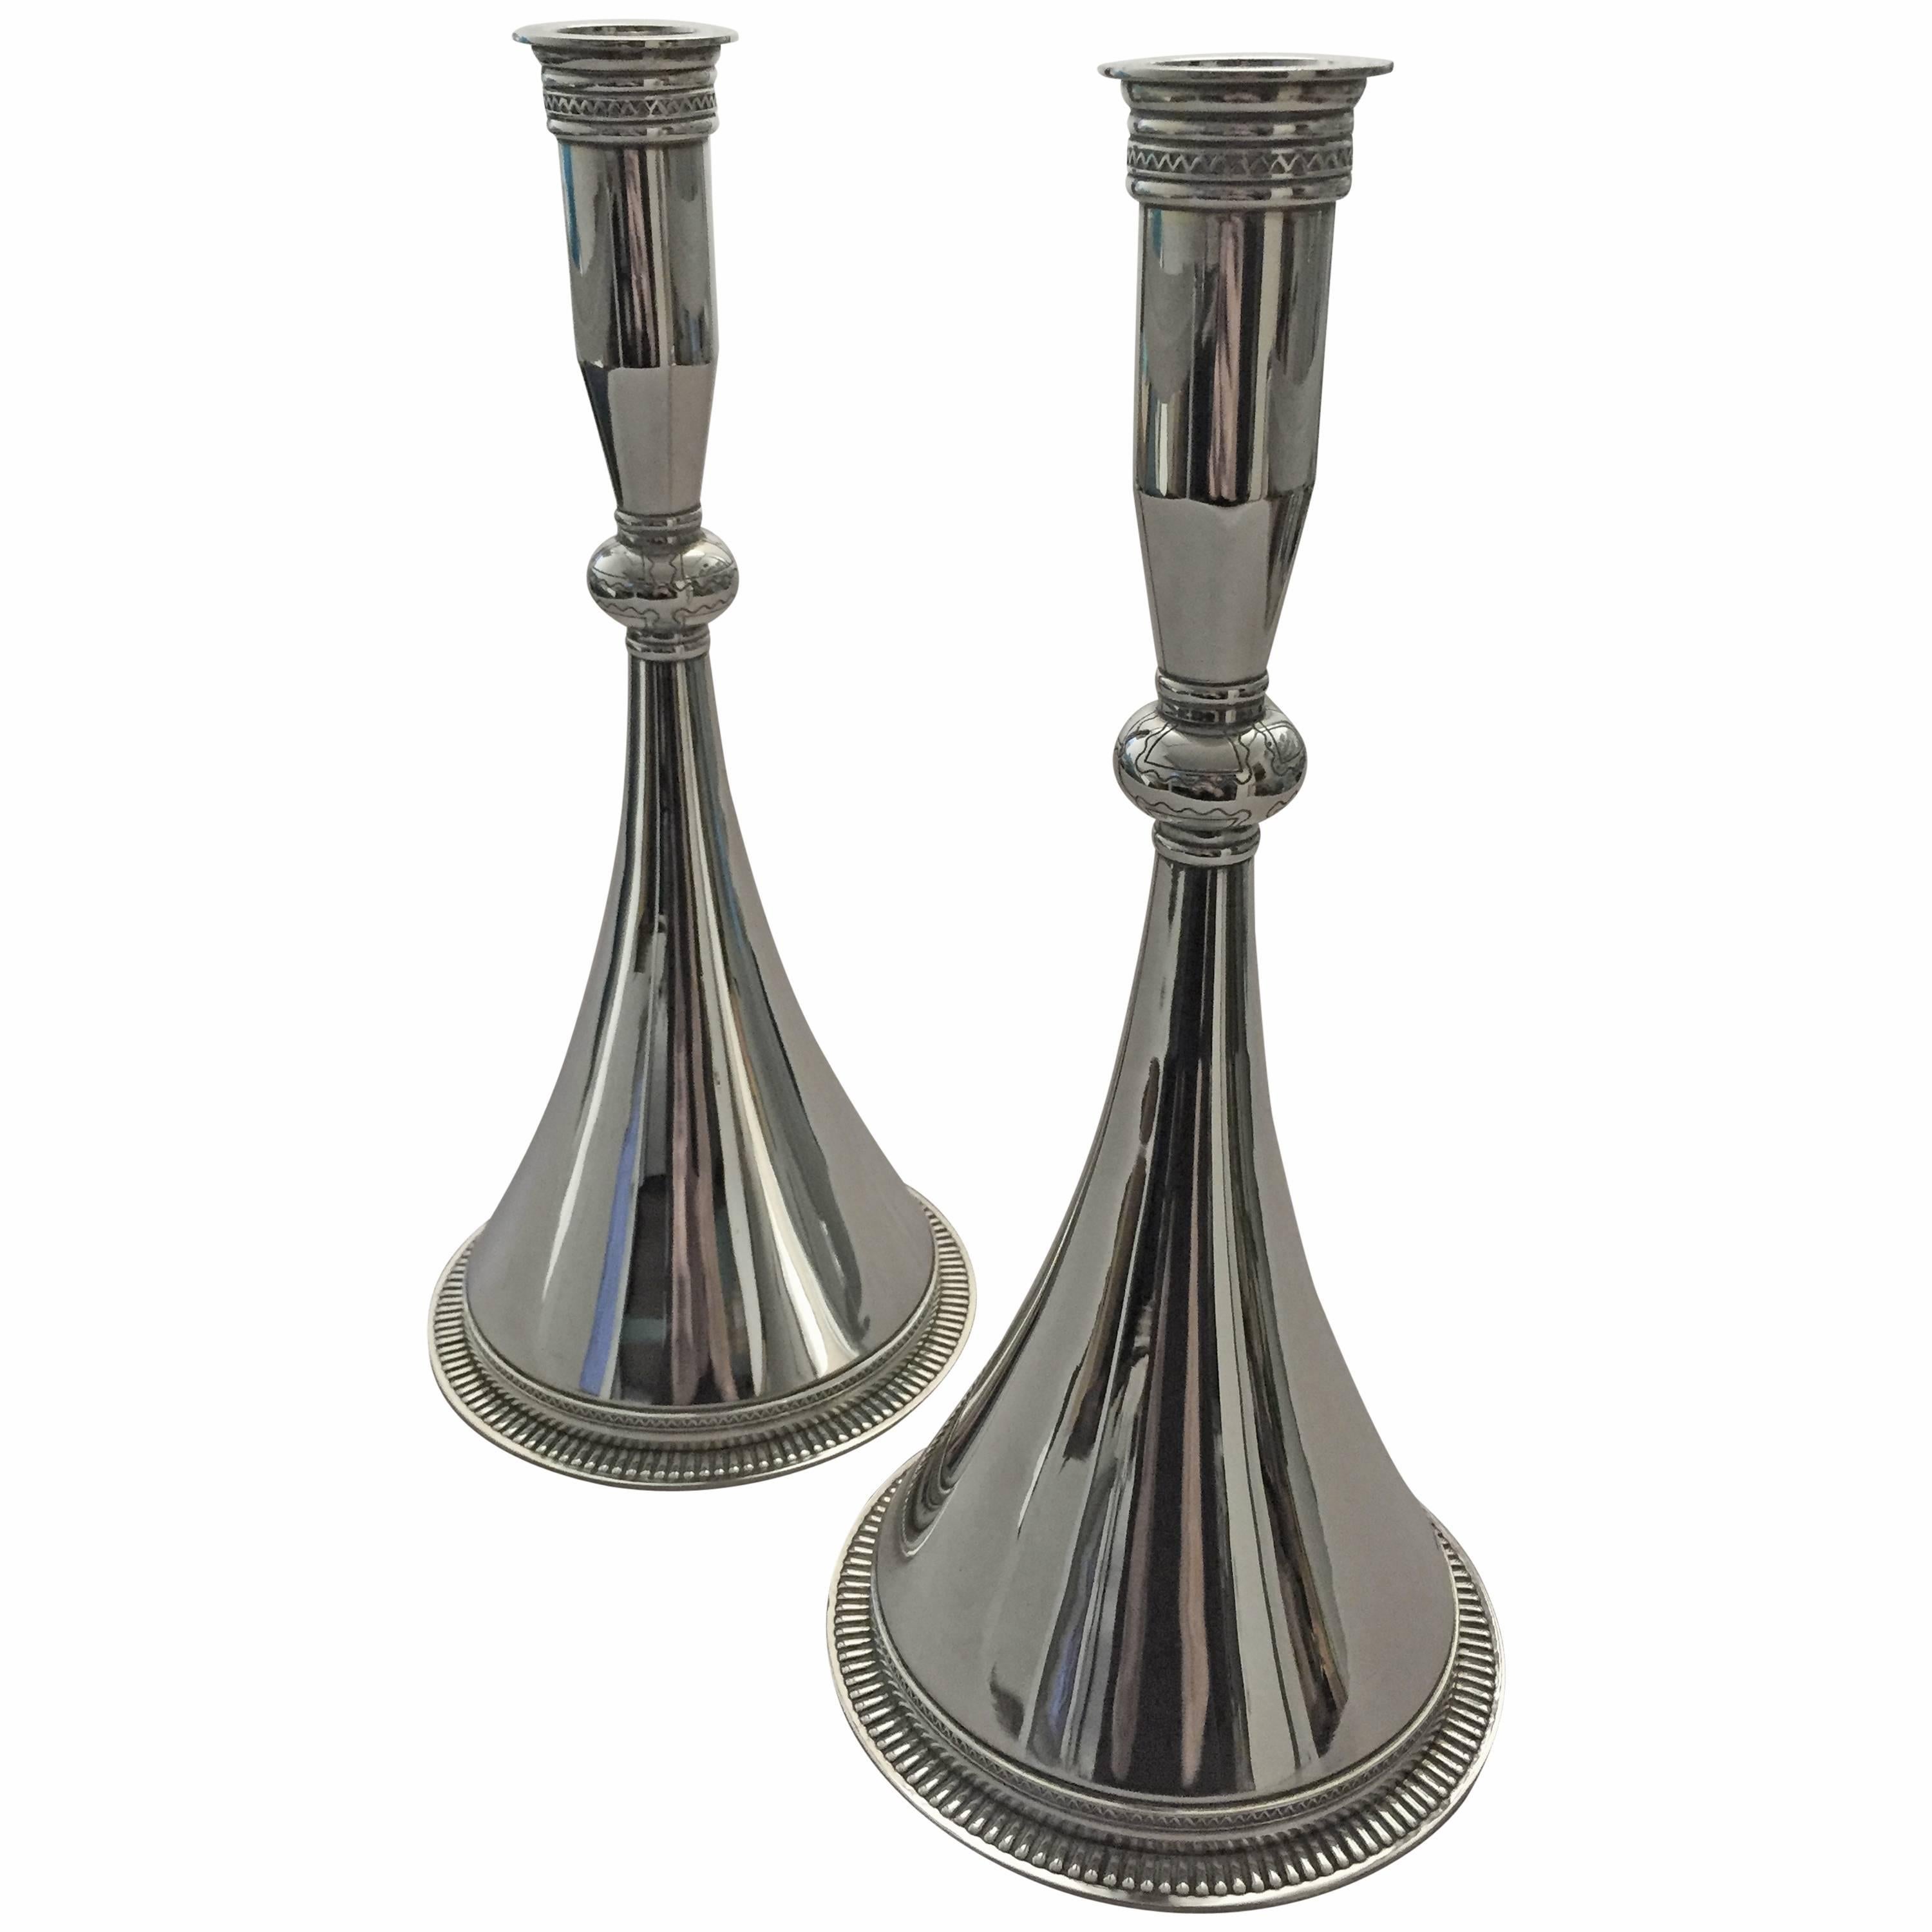 Wiwen Nilsson "Byzantine" Candlesticks from 1957 For Sale